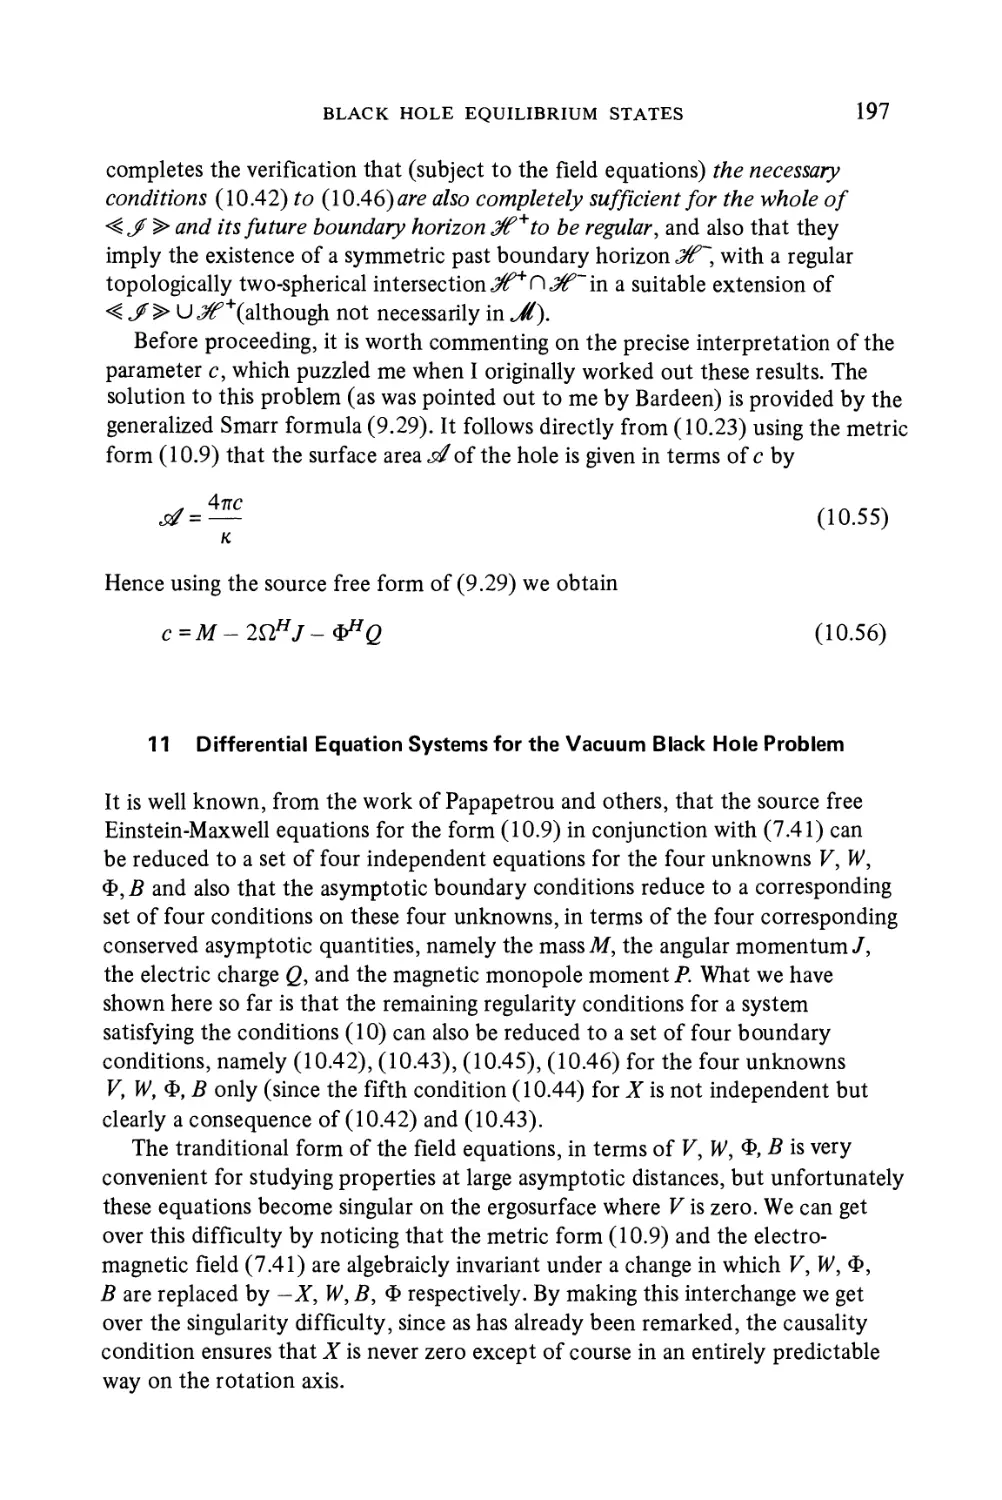 11 Differential Equation Systems for the Vacuum Black Hole Problem